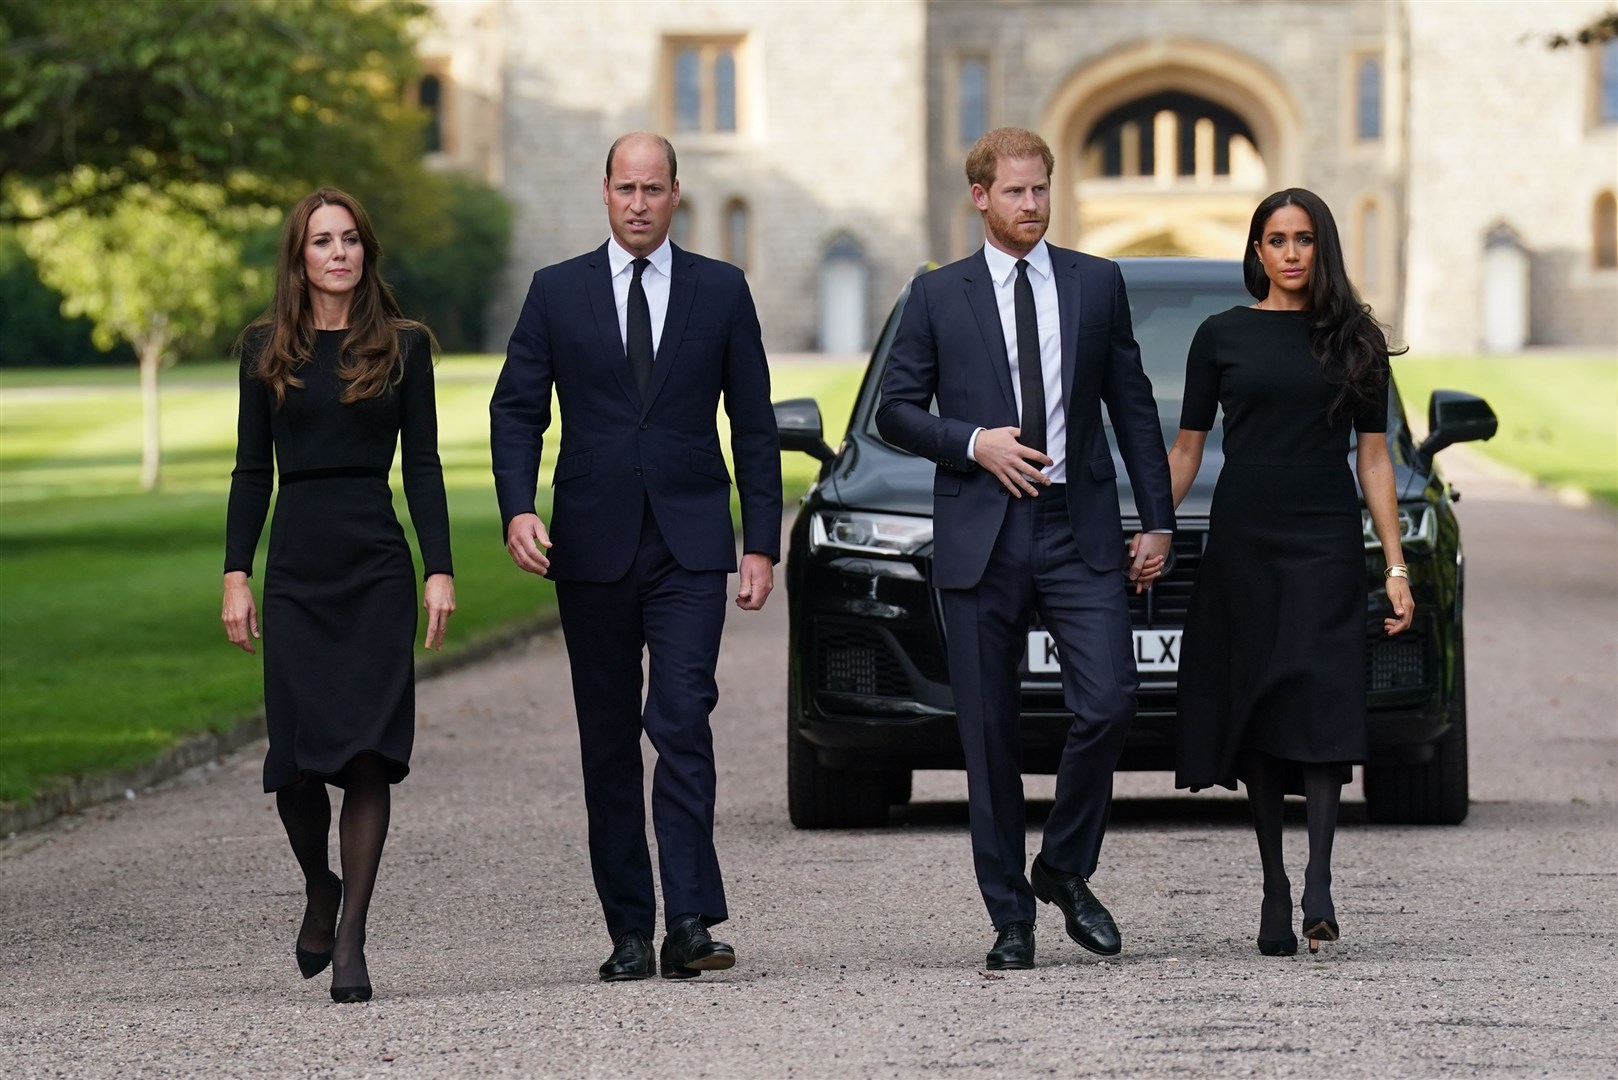 The Princess of Wales, the Prince of Wales and the Duke and Duchess of Sussex walk to meet members of the public at Windsor Castle (Kirsty O’Connor/PA)